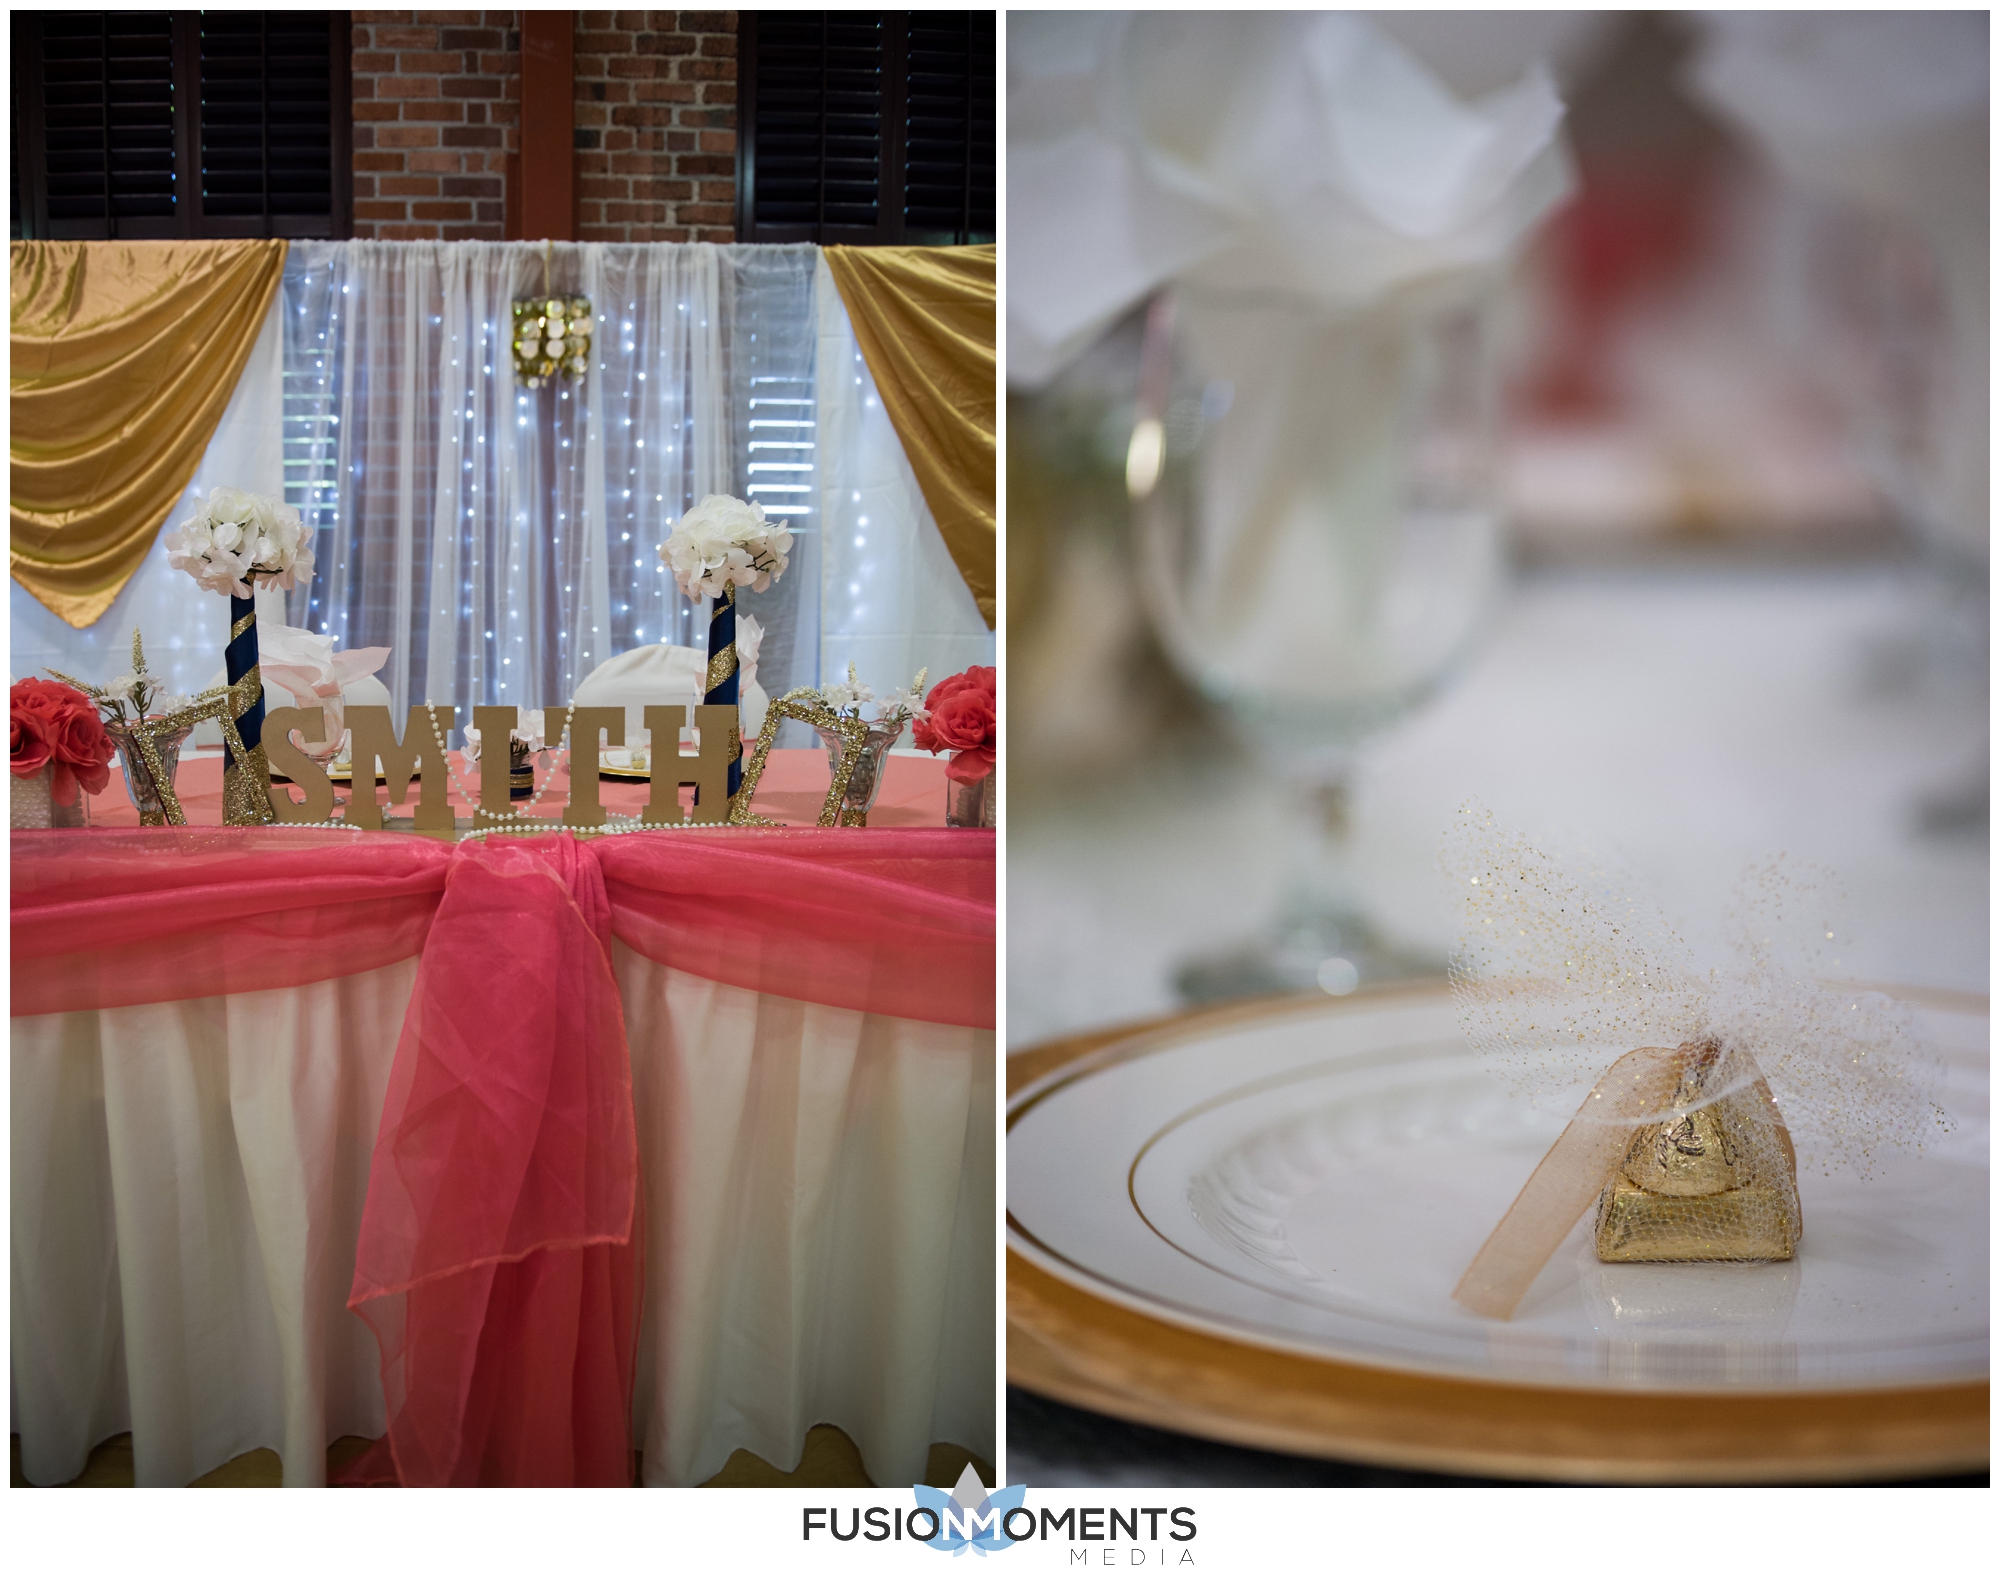 View More: http://fusionmoments.pass.us/joettakevinwedding